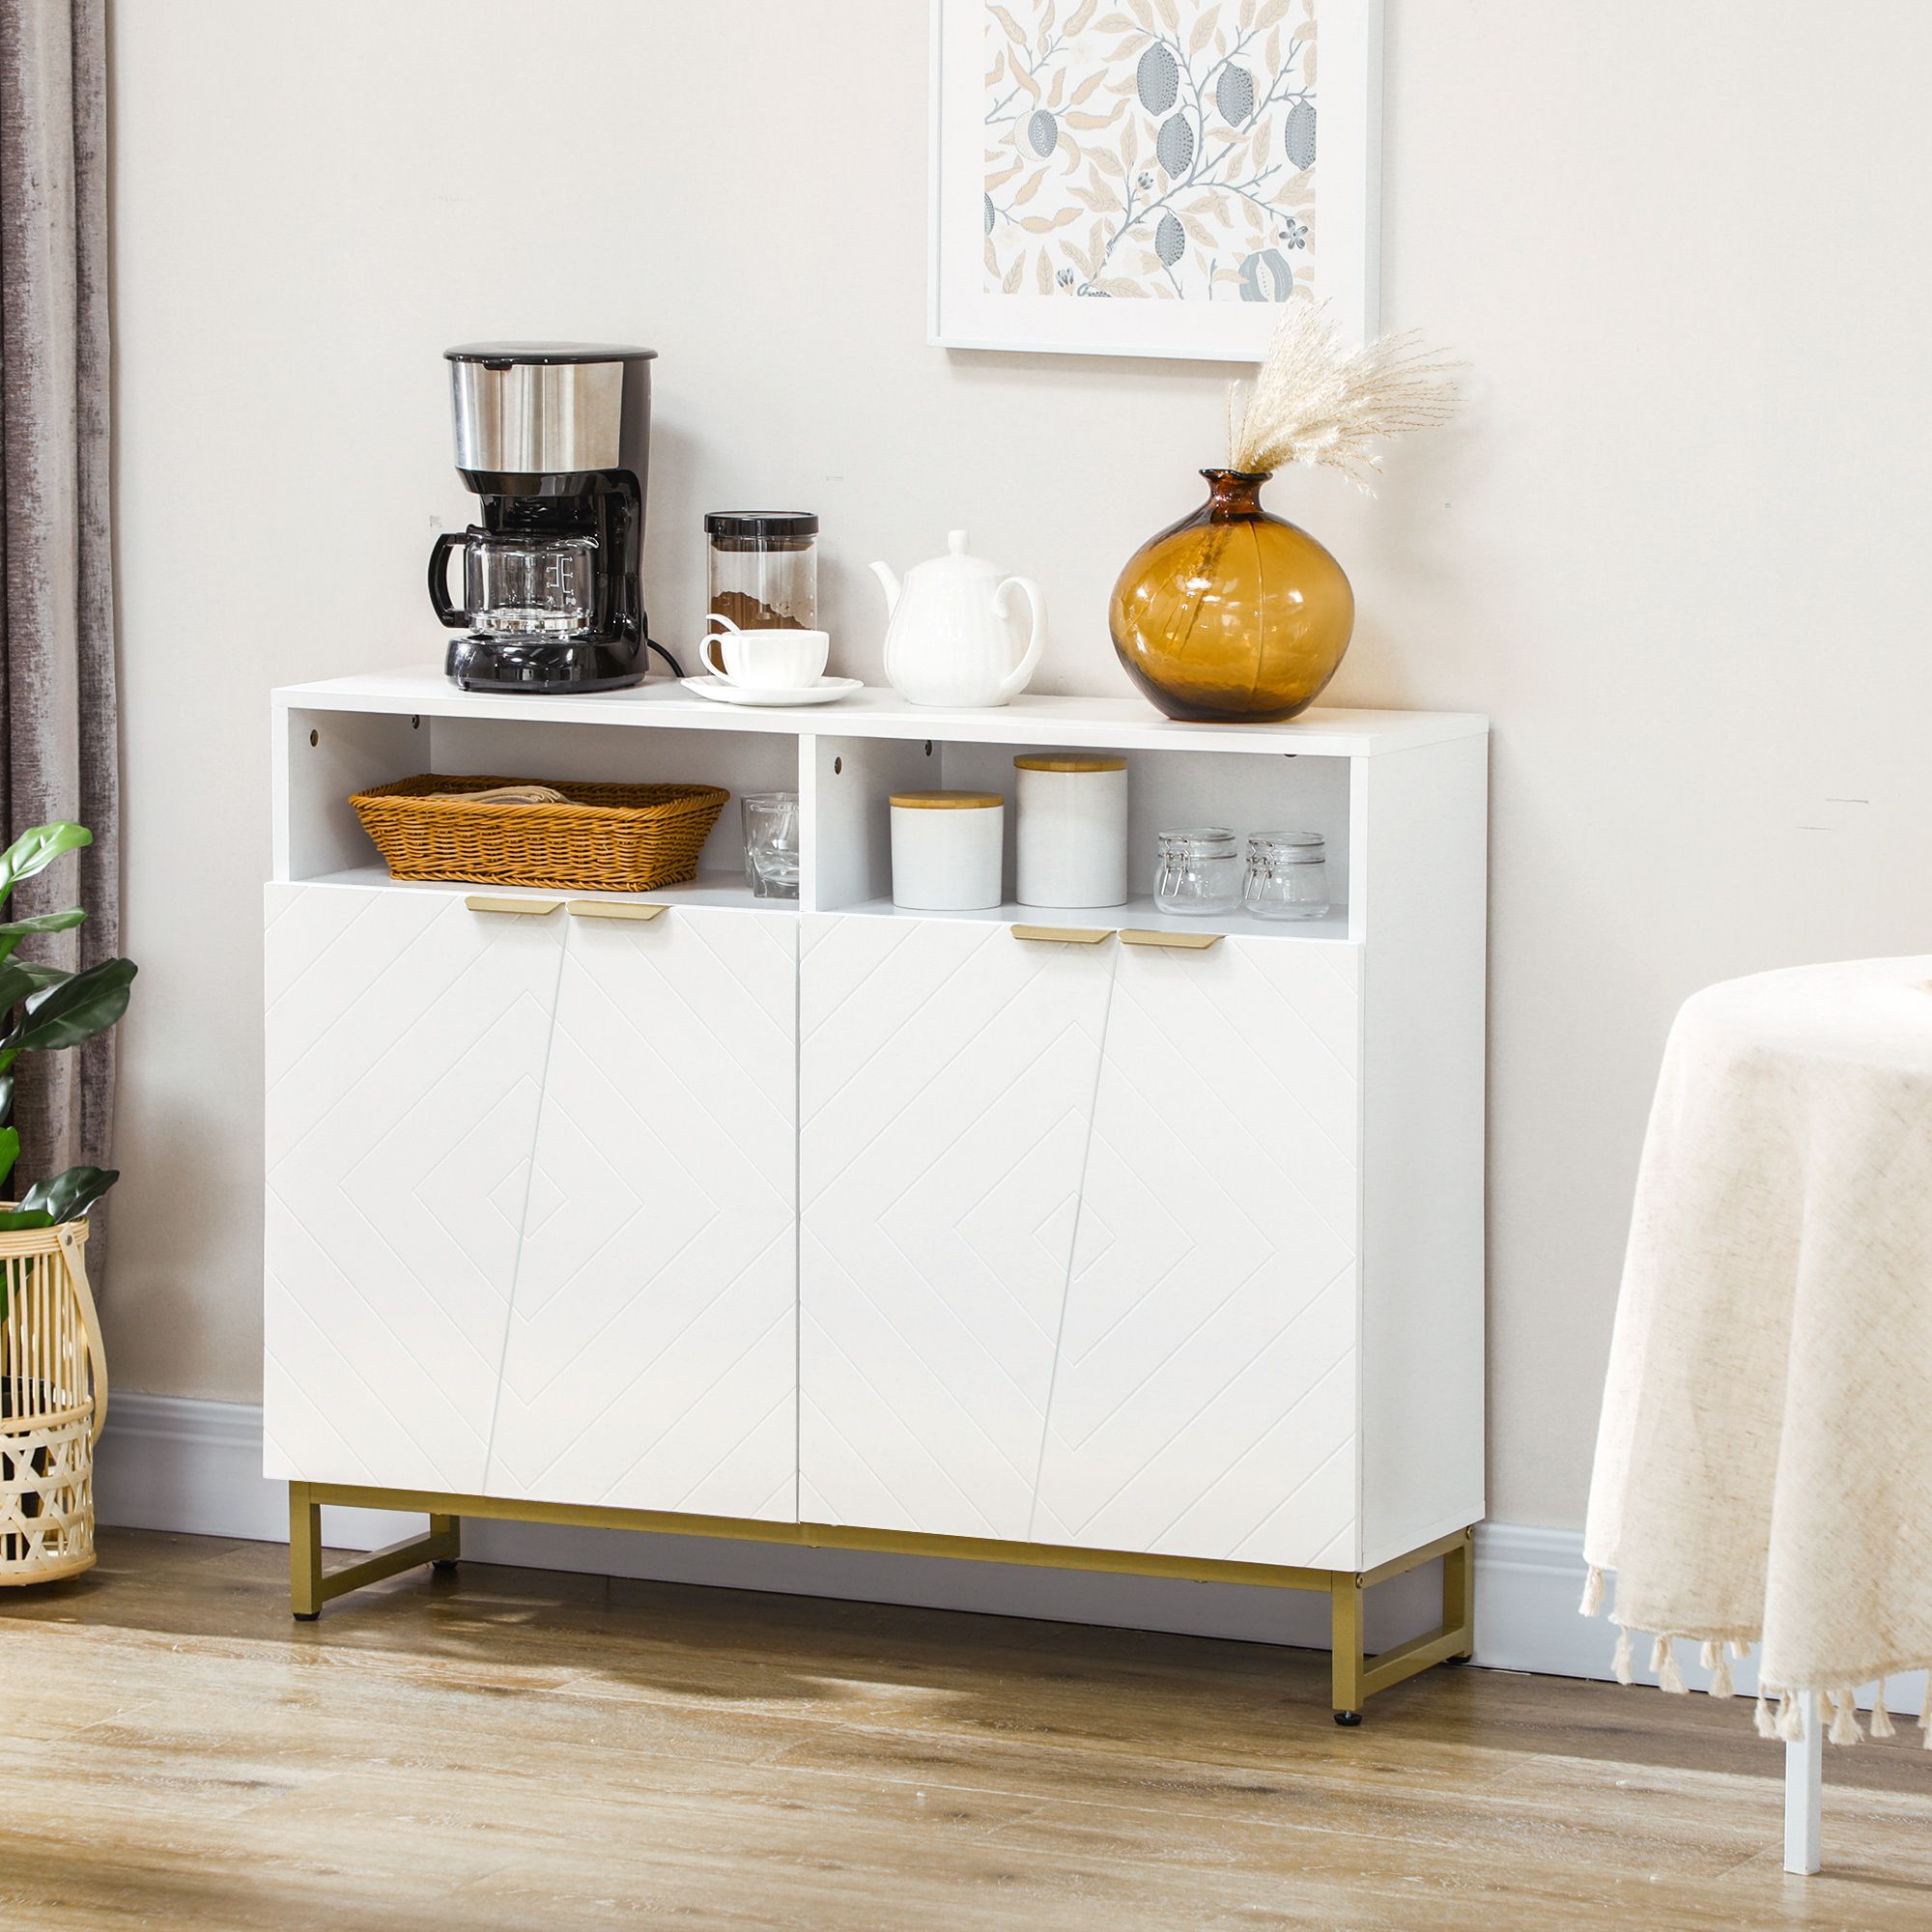 Homcom Accent Sideboards, Kitchen Storage Cabinet With 4 Doors, Adjustable  Shelves, Metal Base For Living Room, Hallway, White | Aosom Canada Throughout Sideboards With Adjustable Shelves (View 11 of 15)